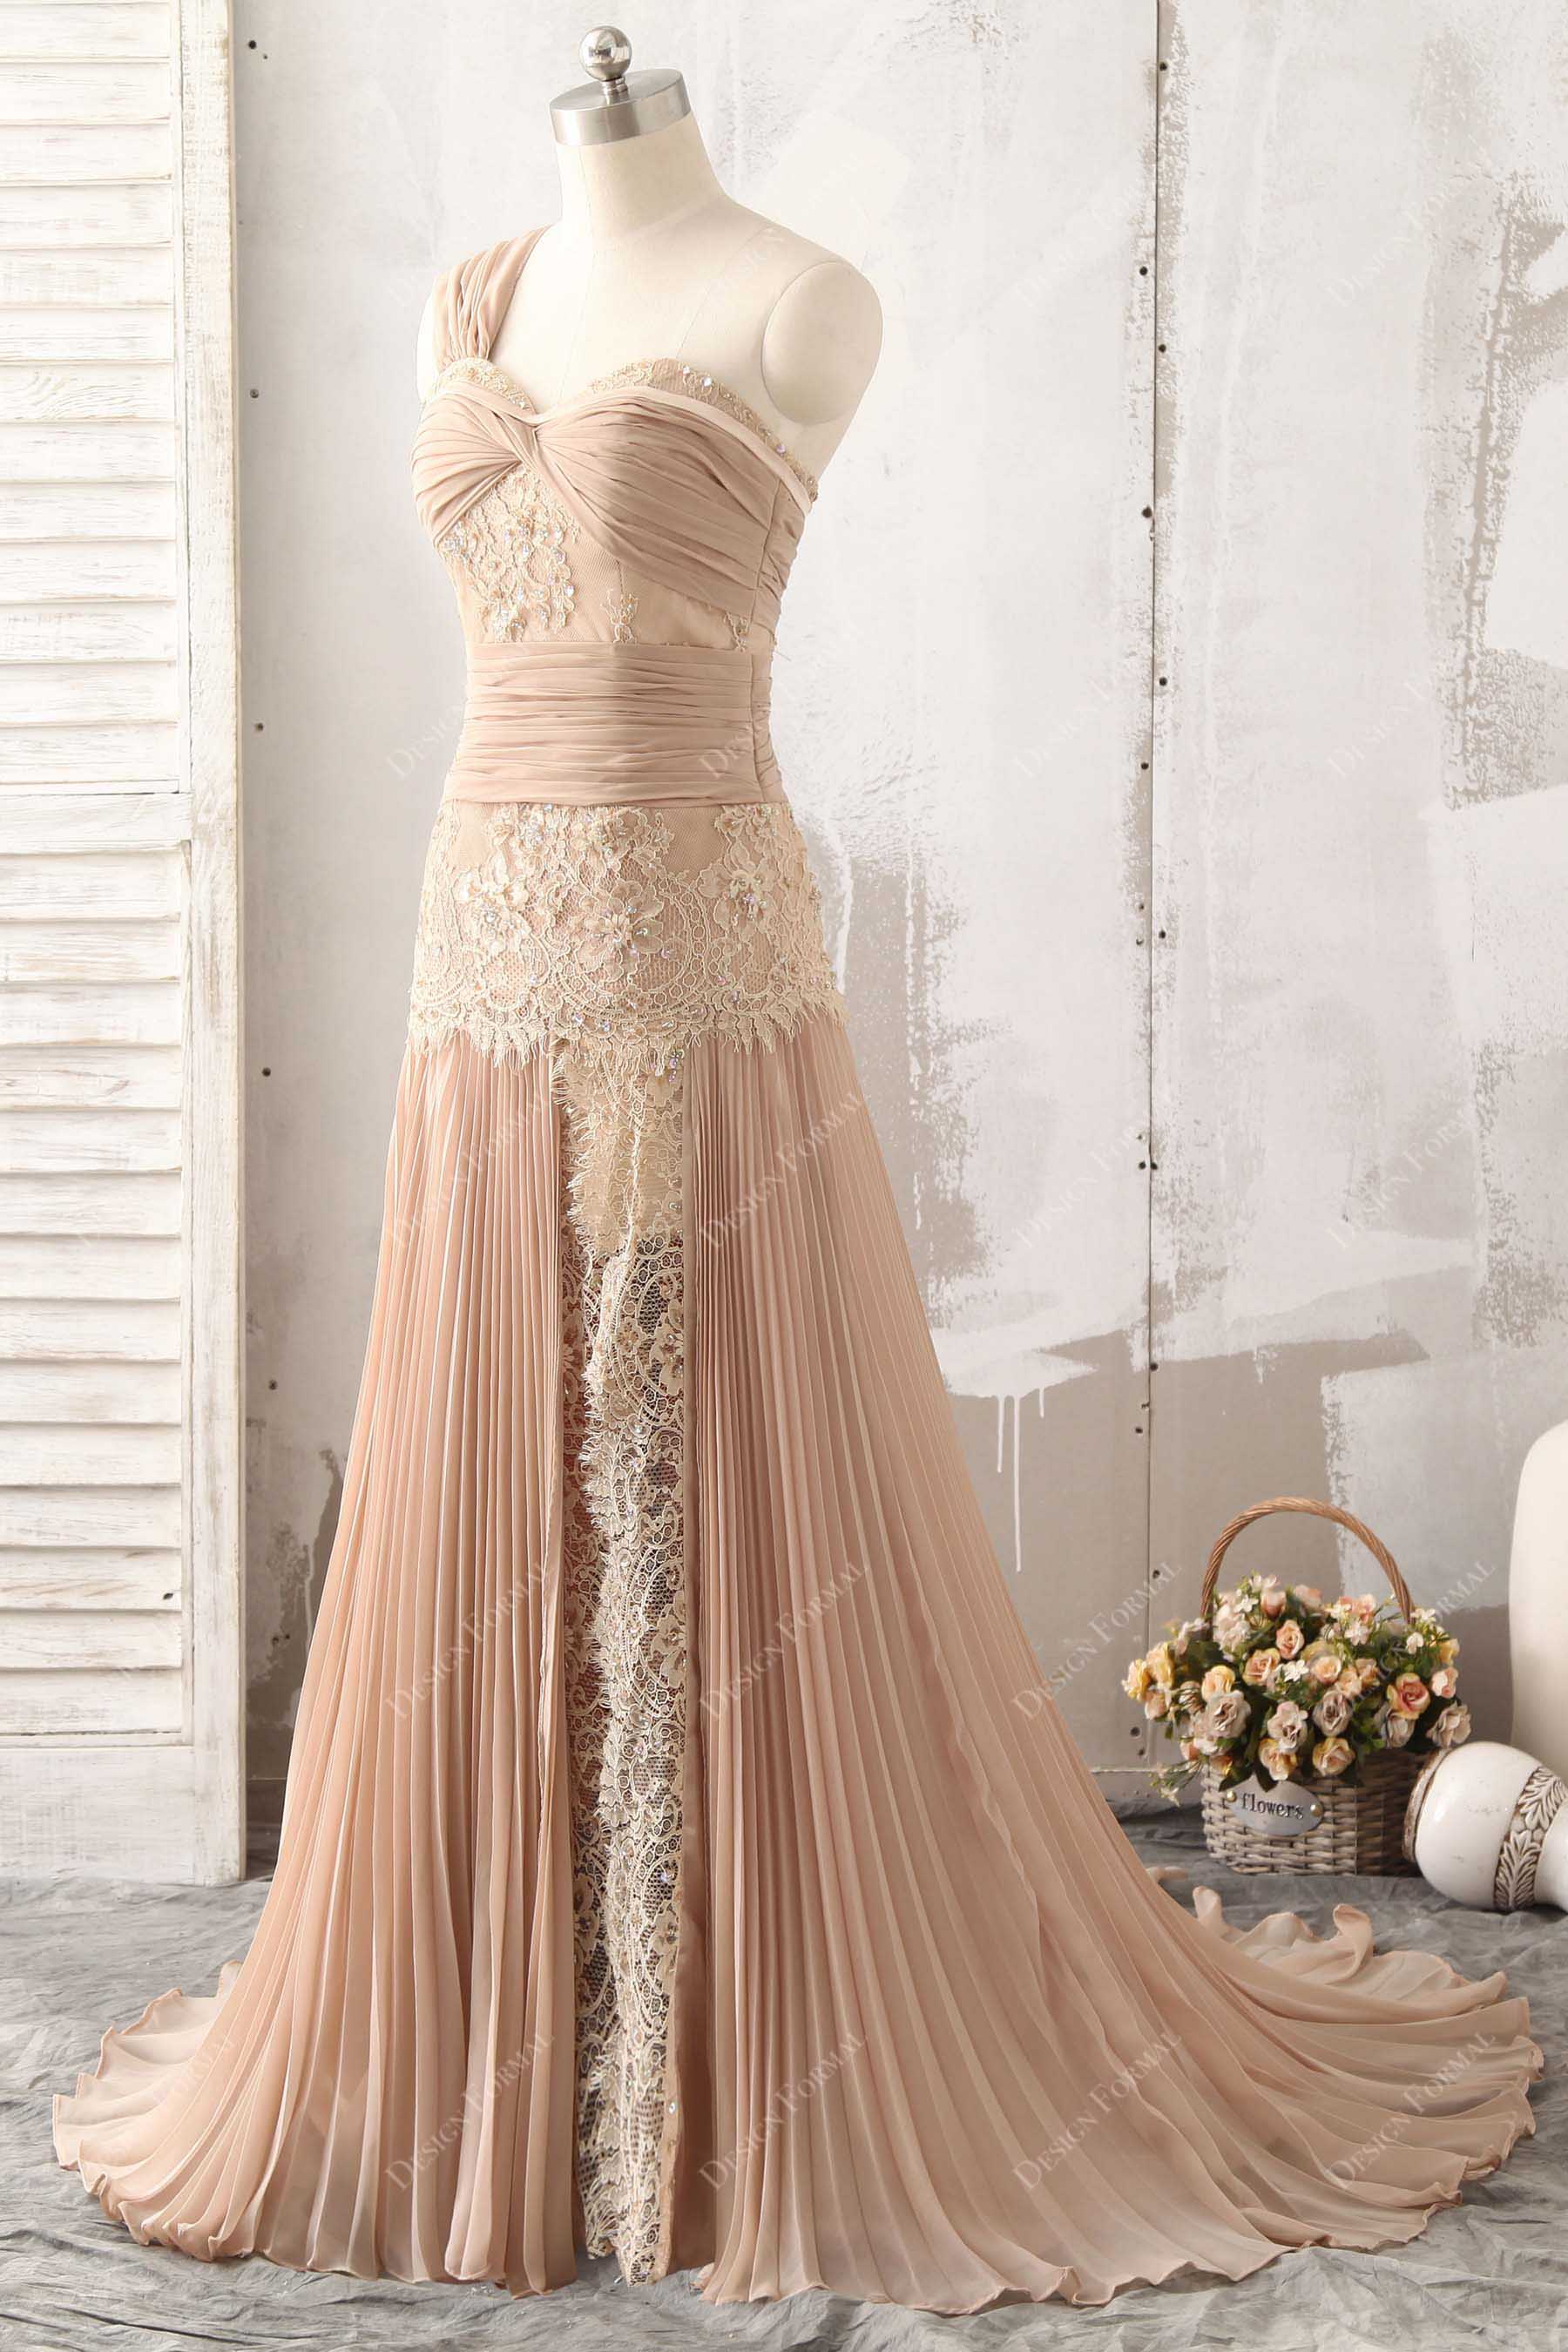 One Shoulder Apricot Lace Prom Dress